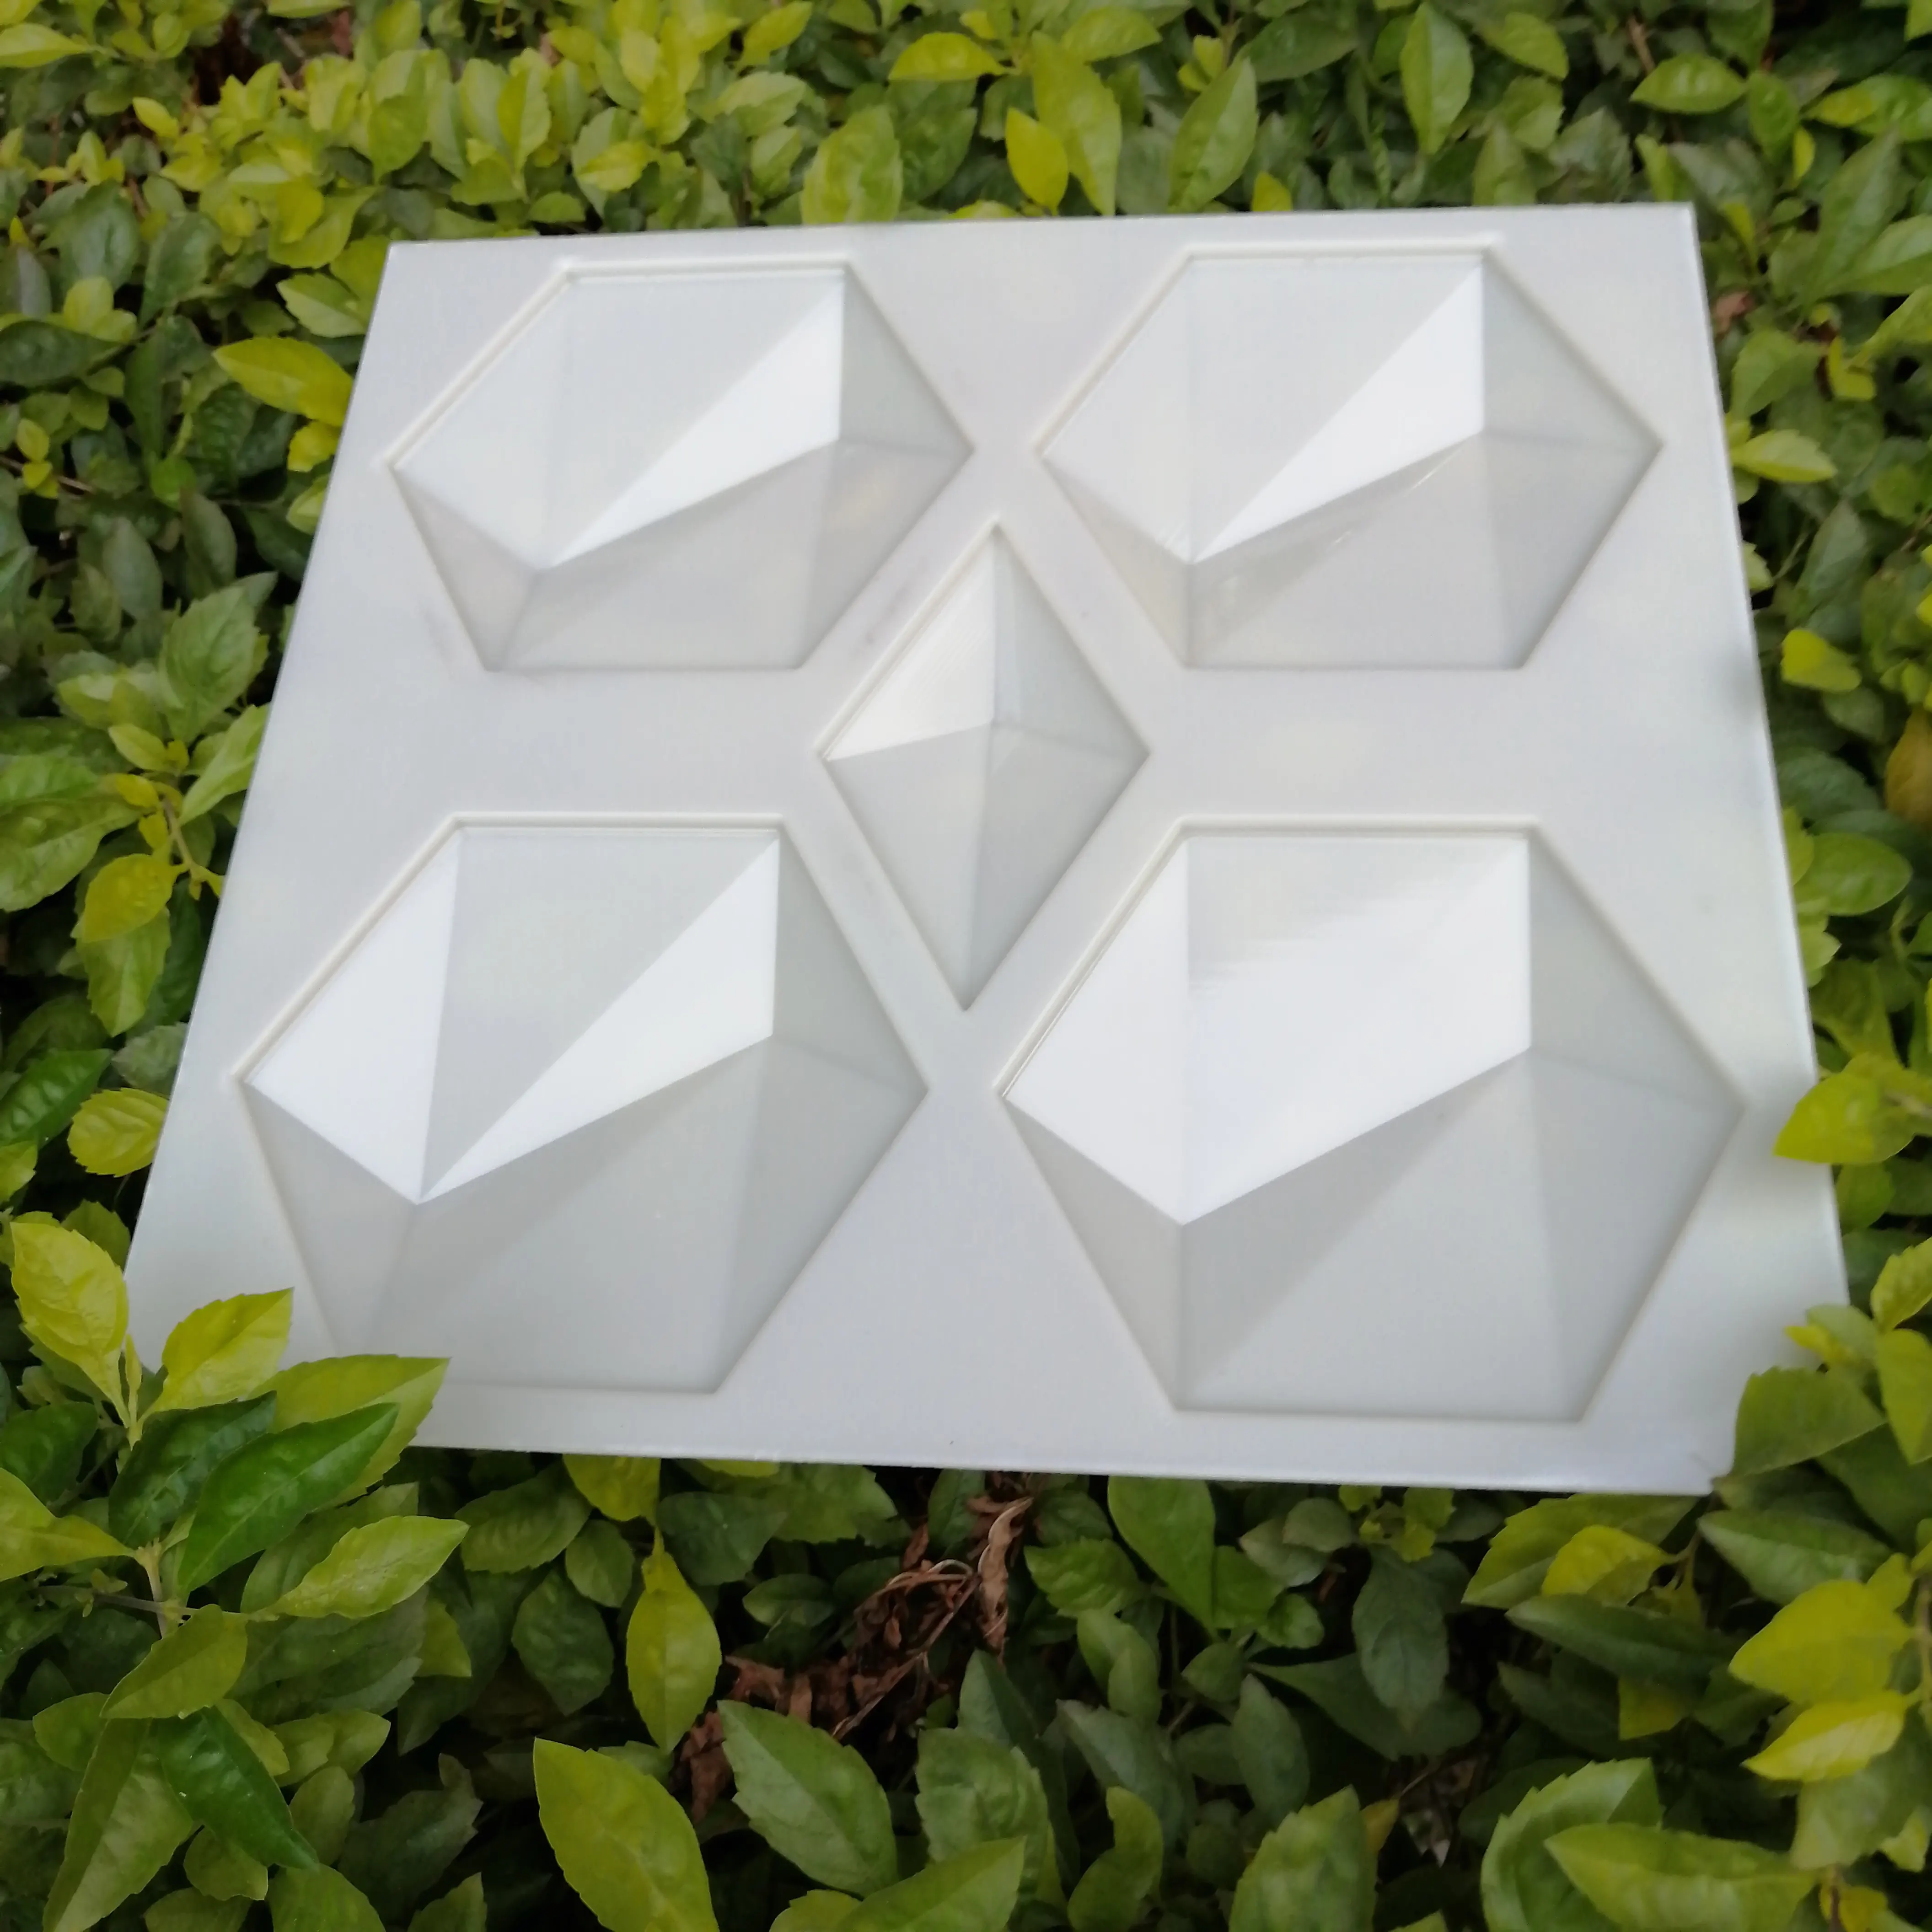 Cost-effective custom vacuum formed plastic tile mold for making 3D decorative tile with texiture and pattern